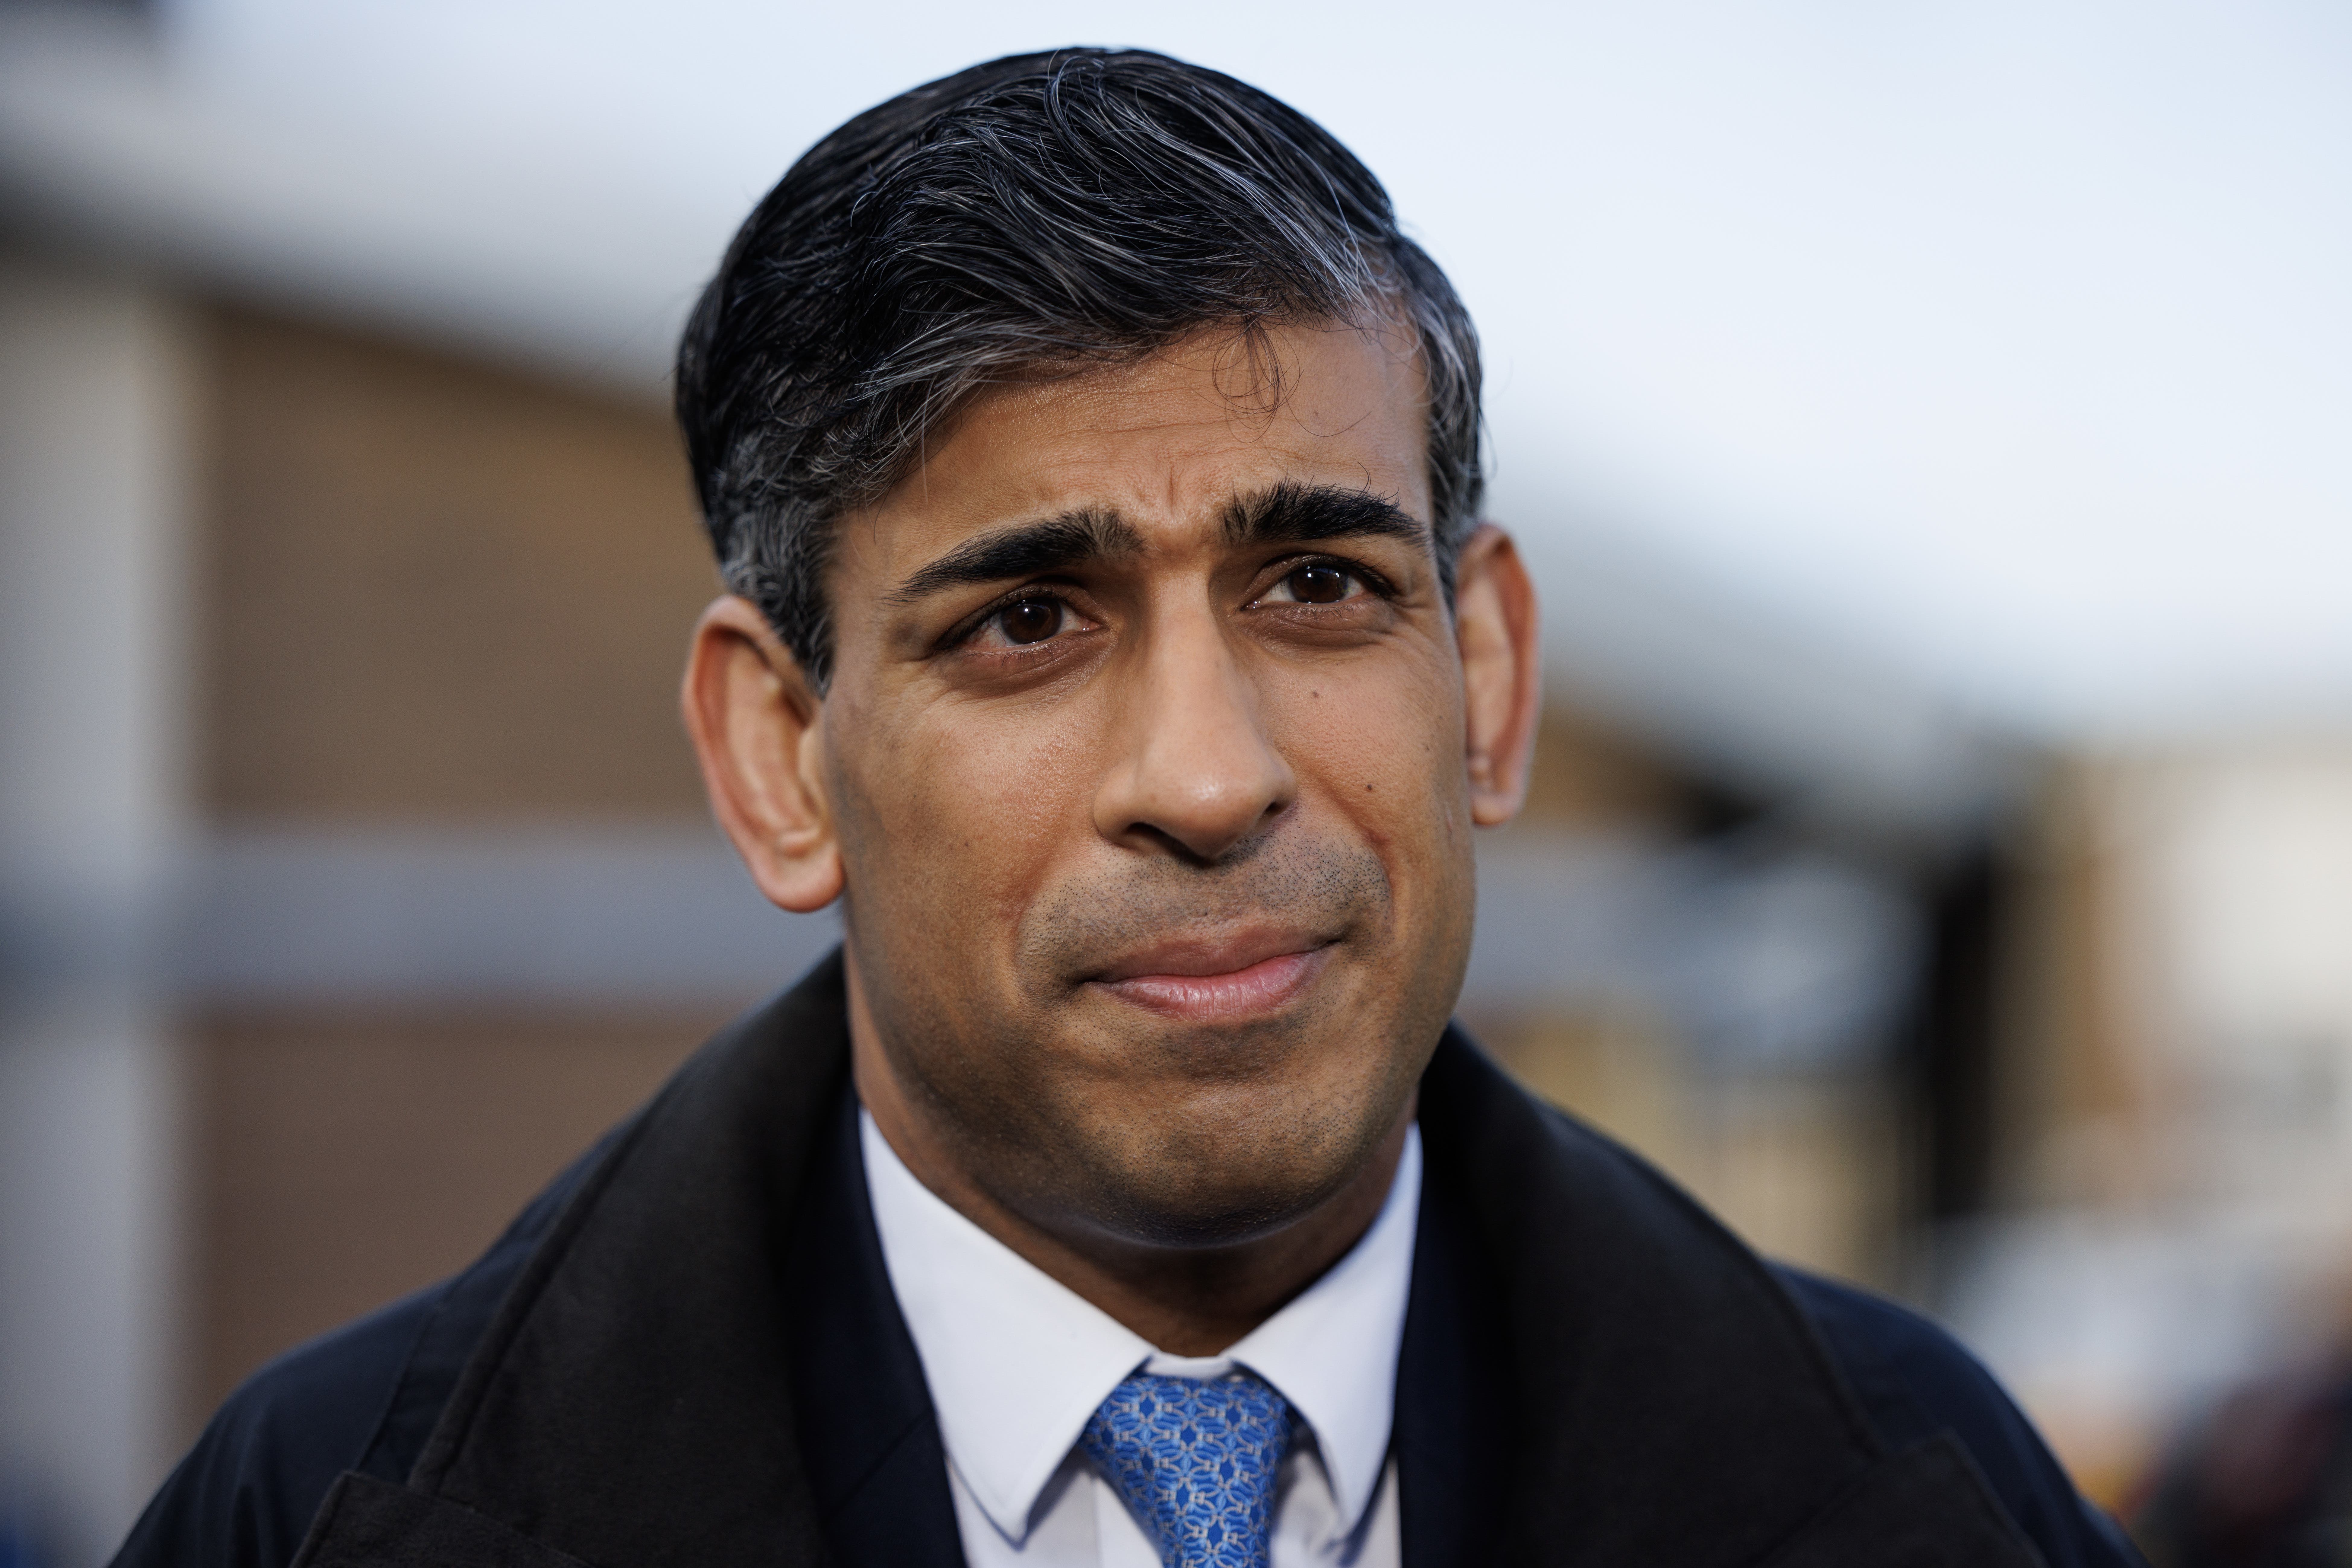 Prime Minister Rishi Sunak called on the wider conservative movement to unite to keep Sir Keir Starmer out of Number 10